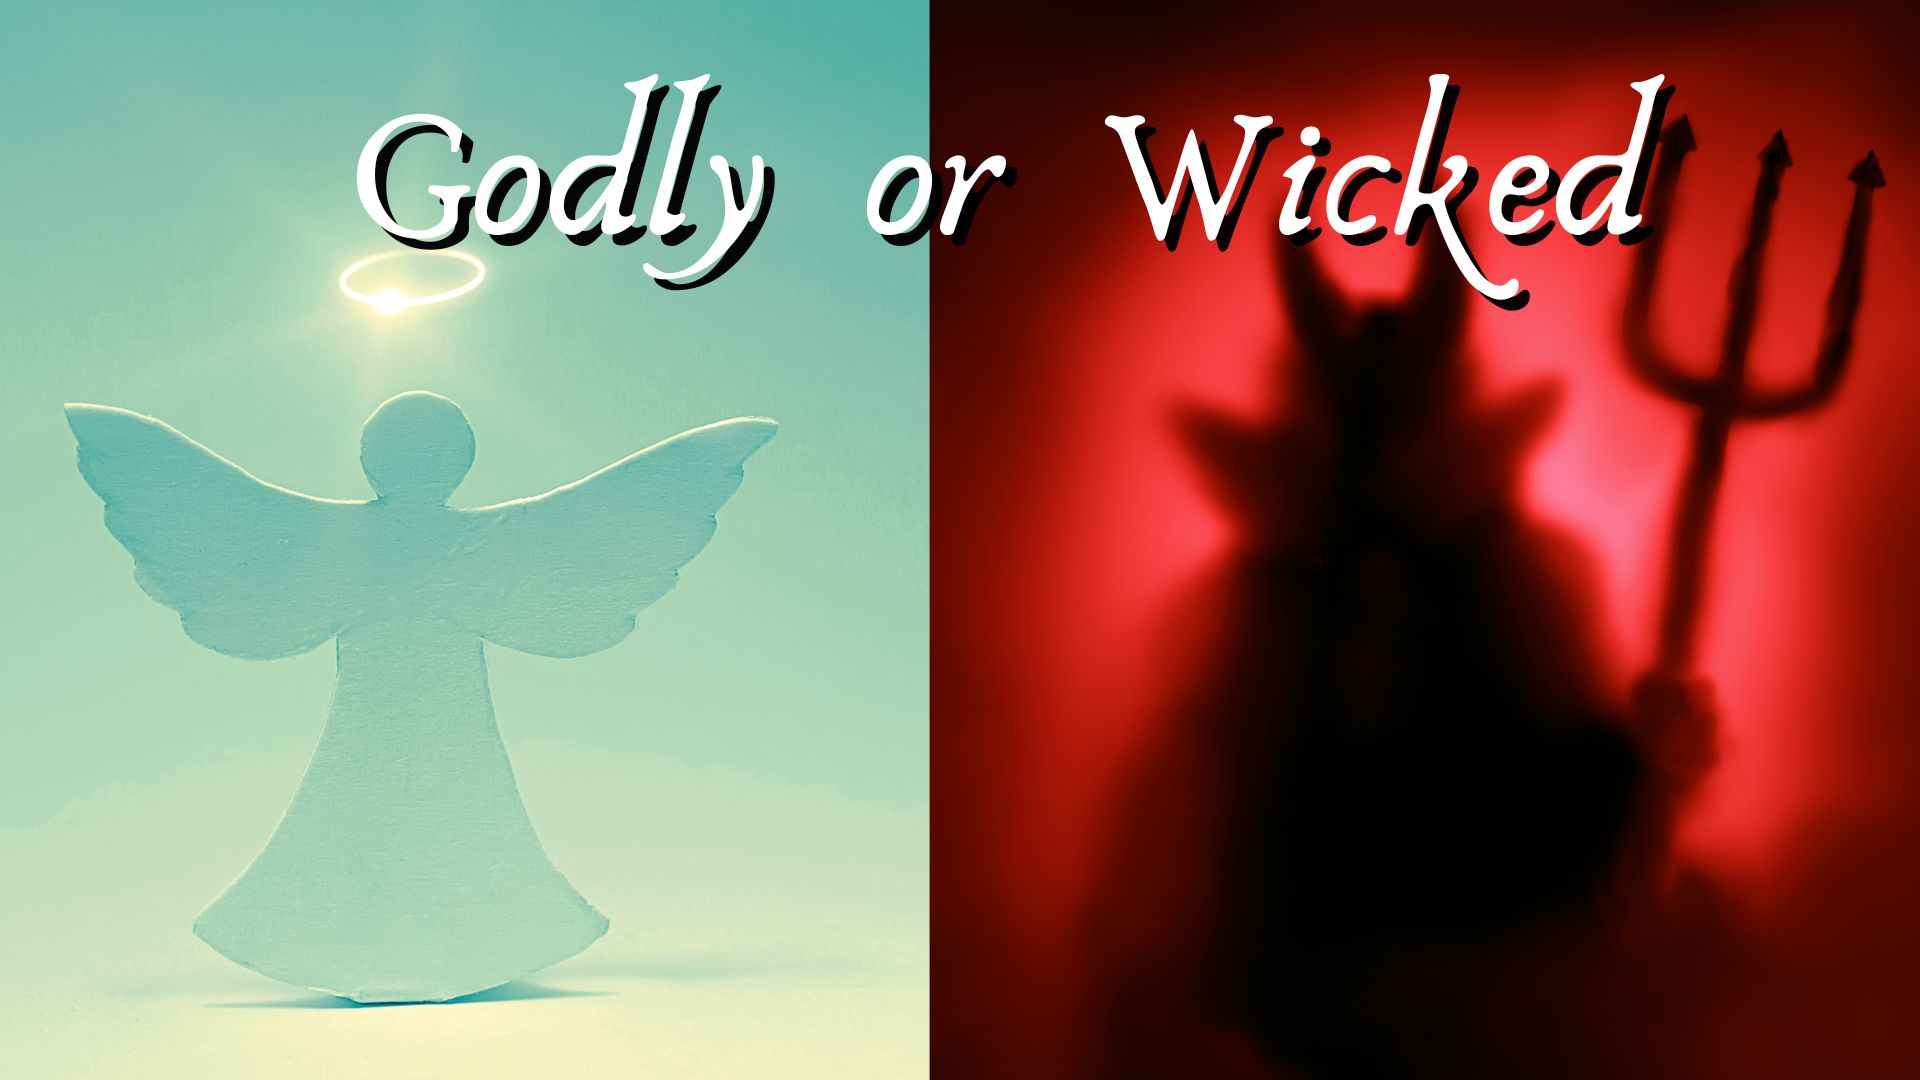 Featured image for “Godly or Wicked”